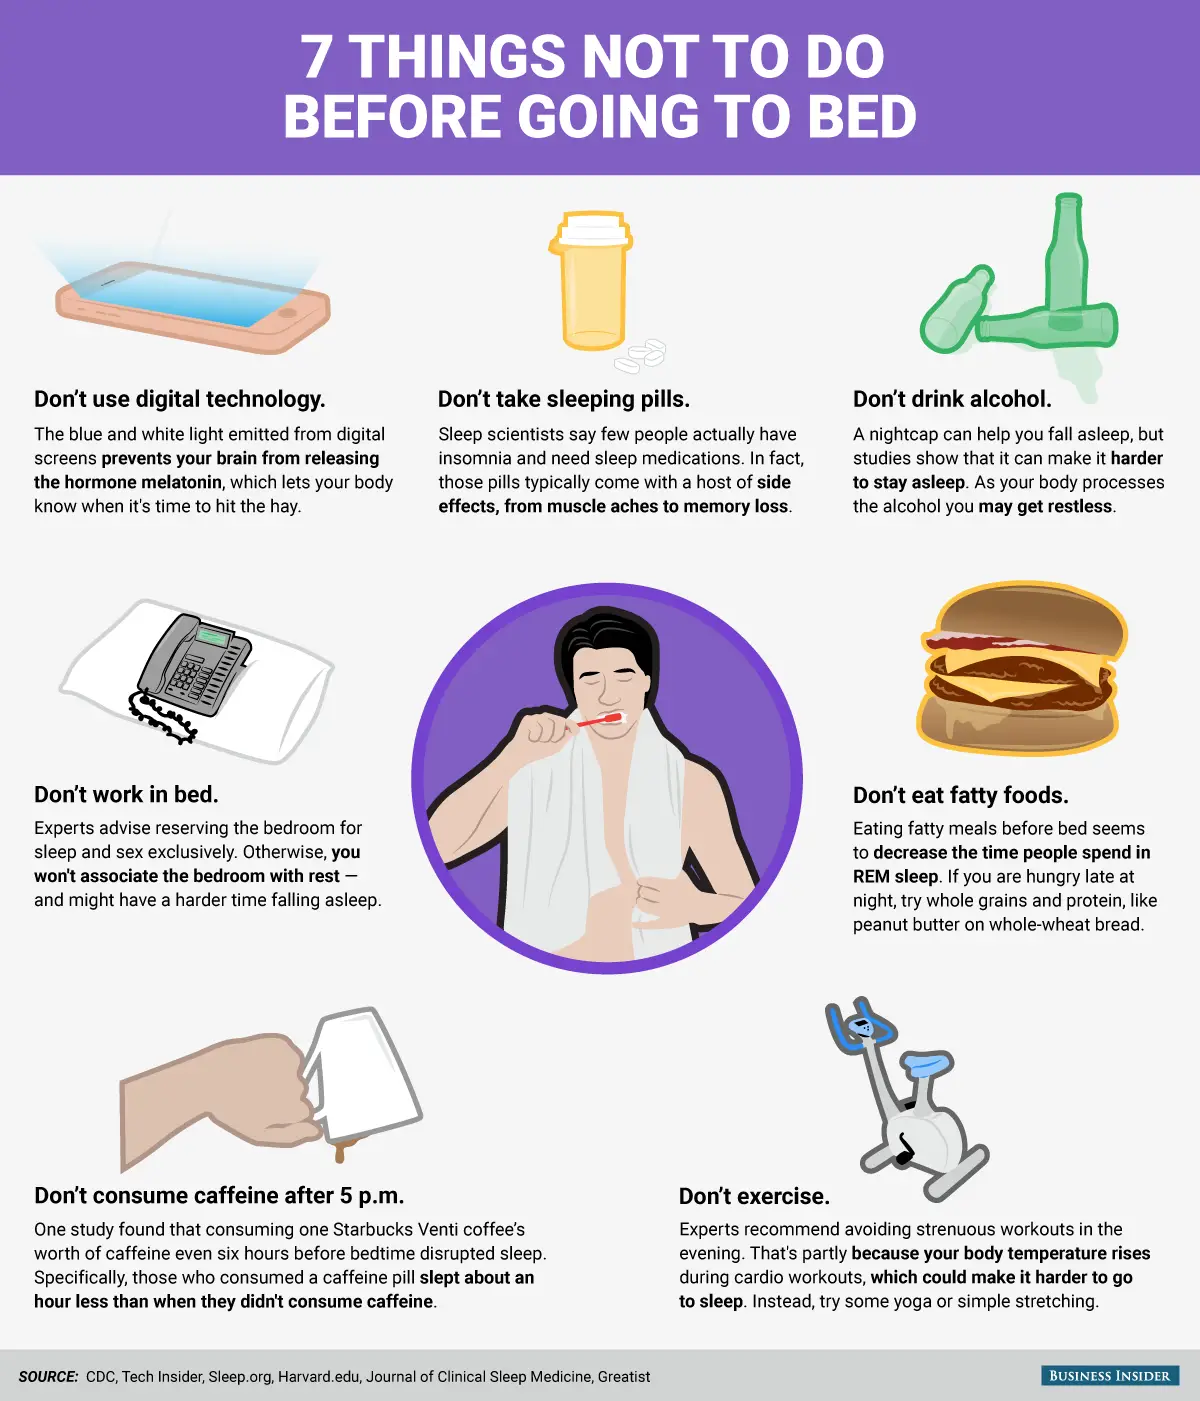 10 Worst Things to Do Before Bed